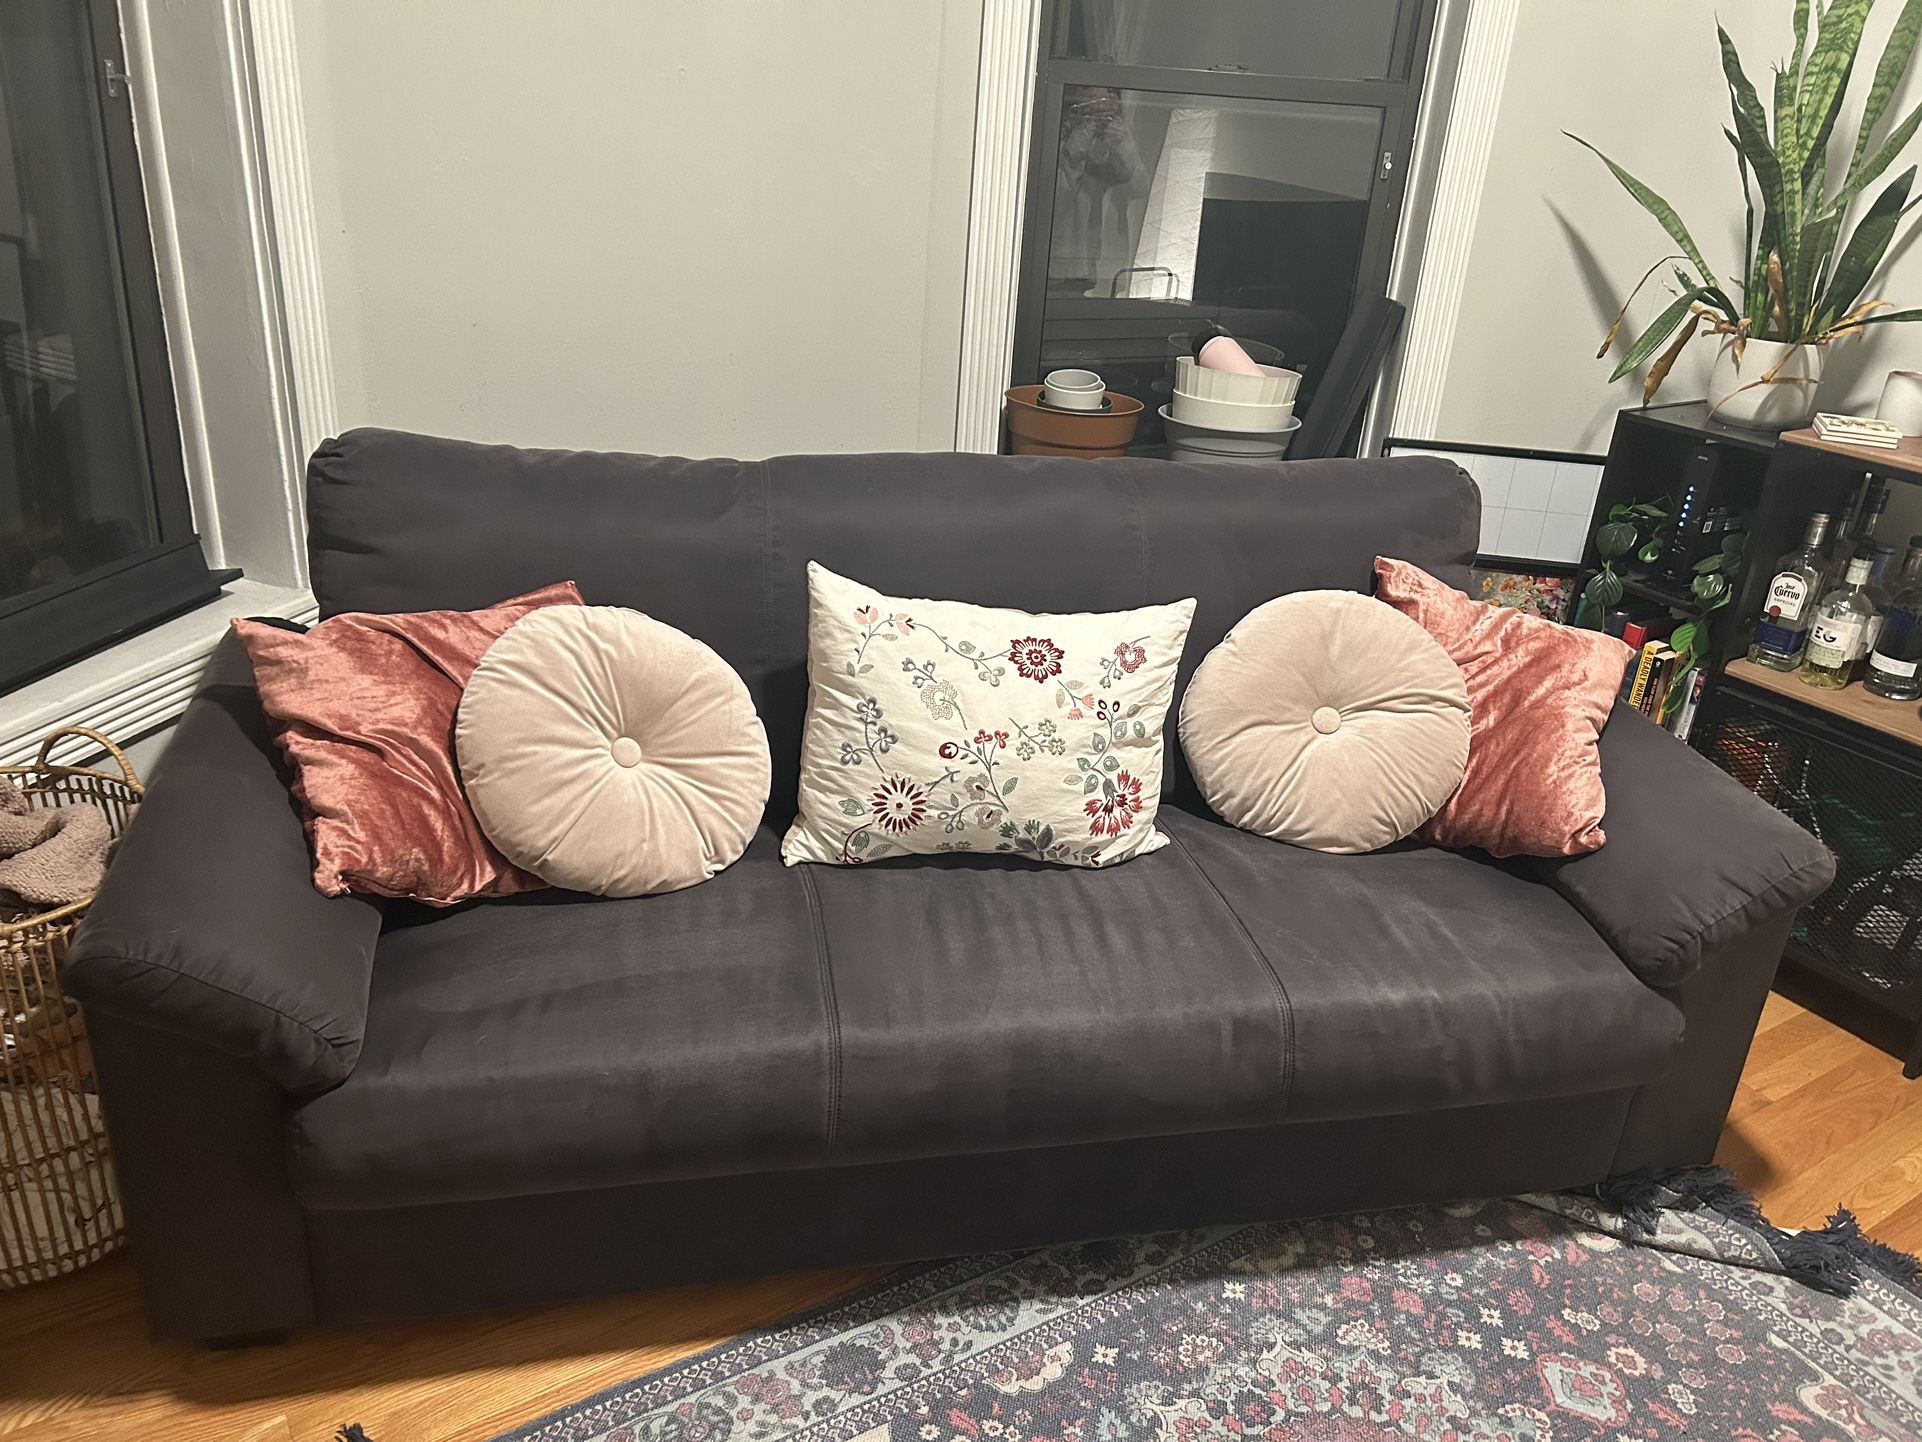 Couch + Pillows